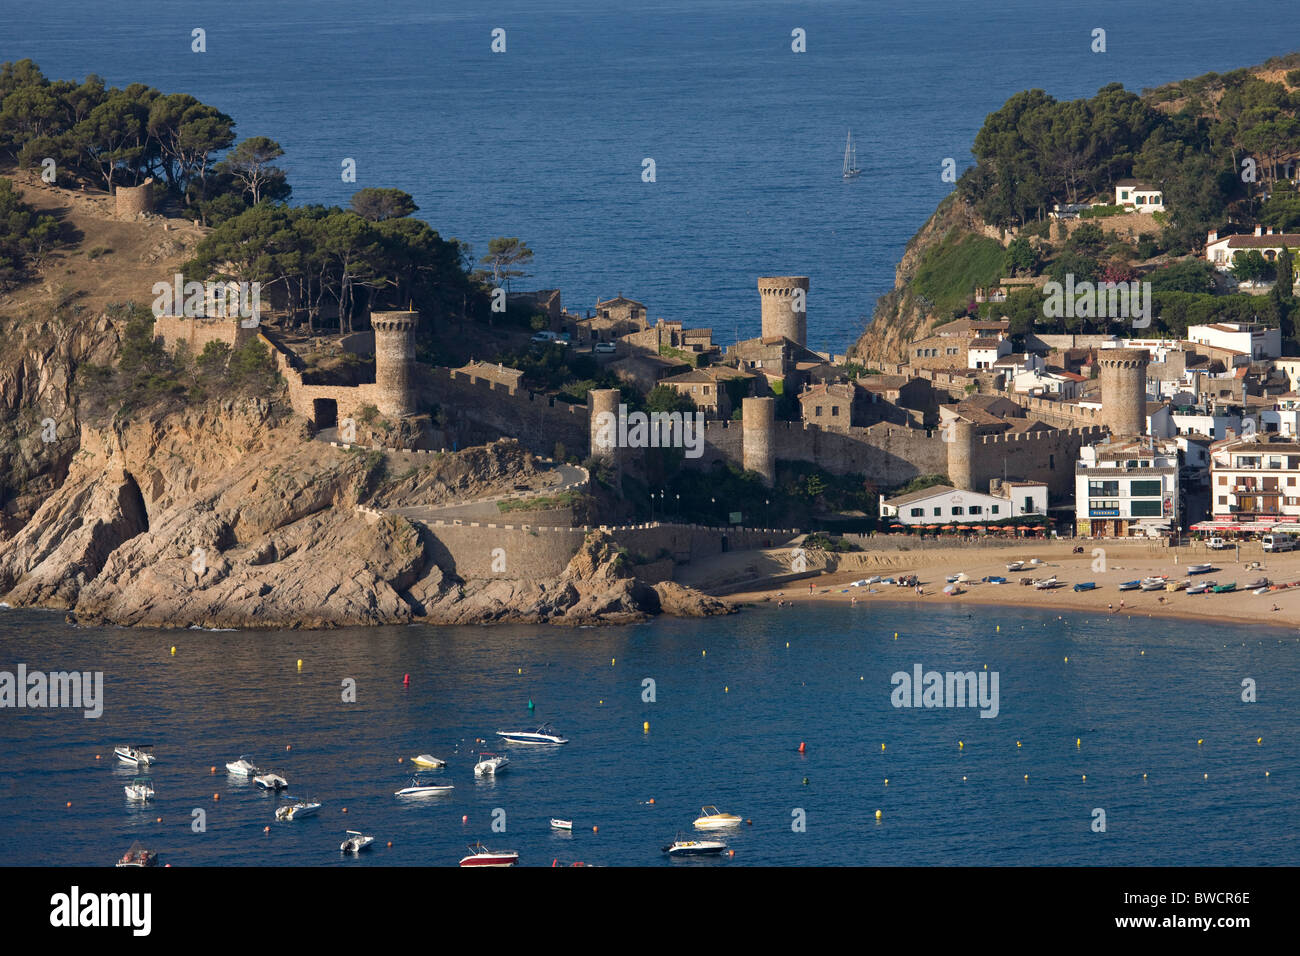 View of Tossa de Mar showing the medieval fortified and turreted walls. Stock Photo